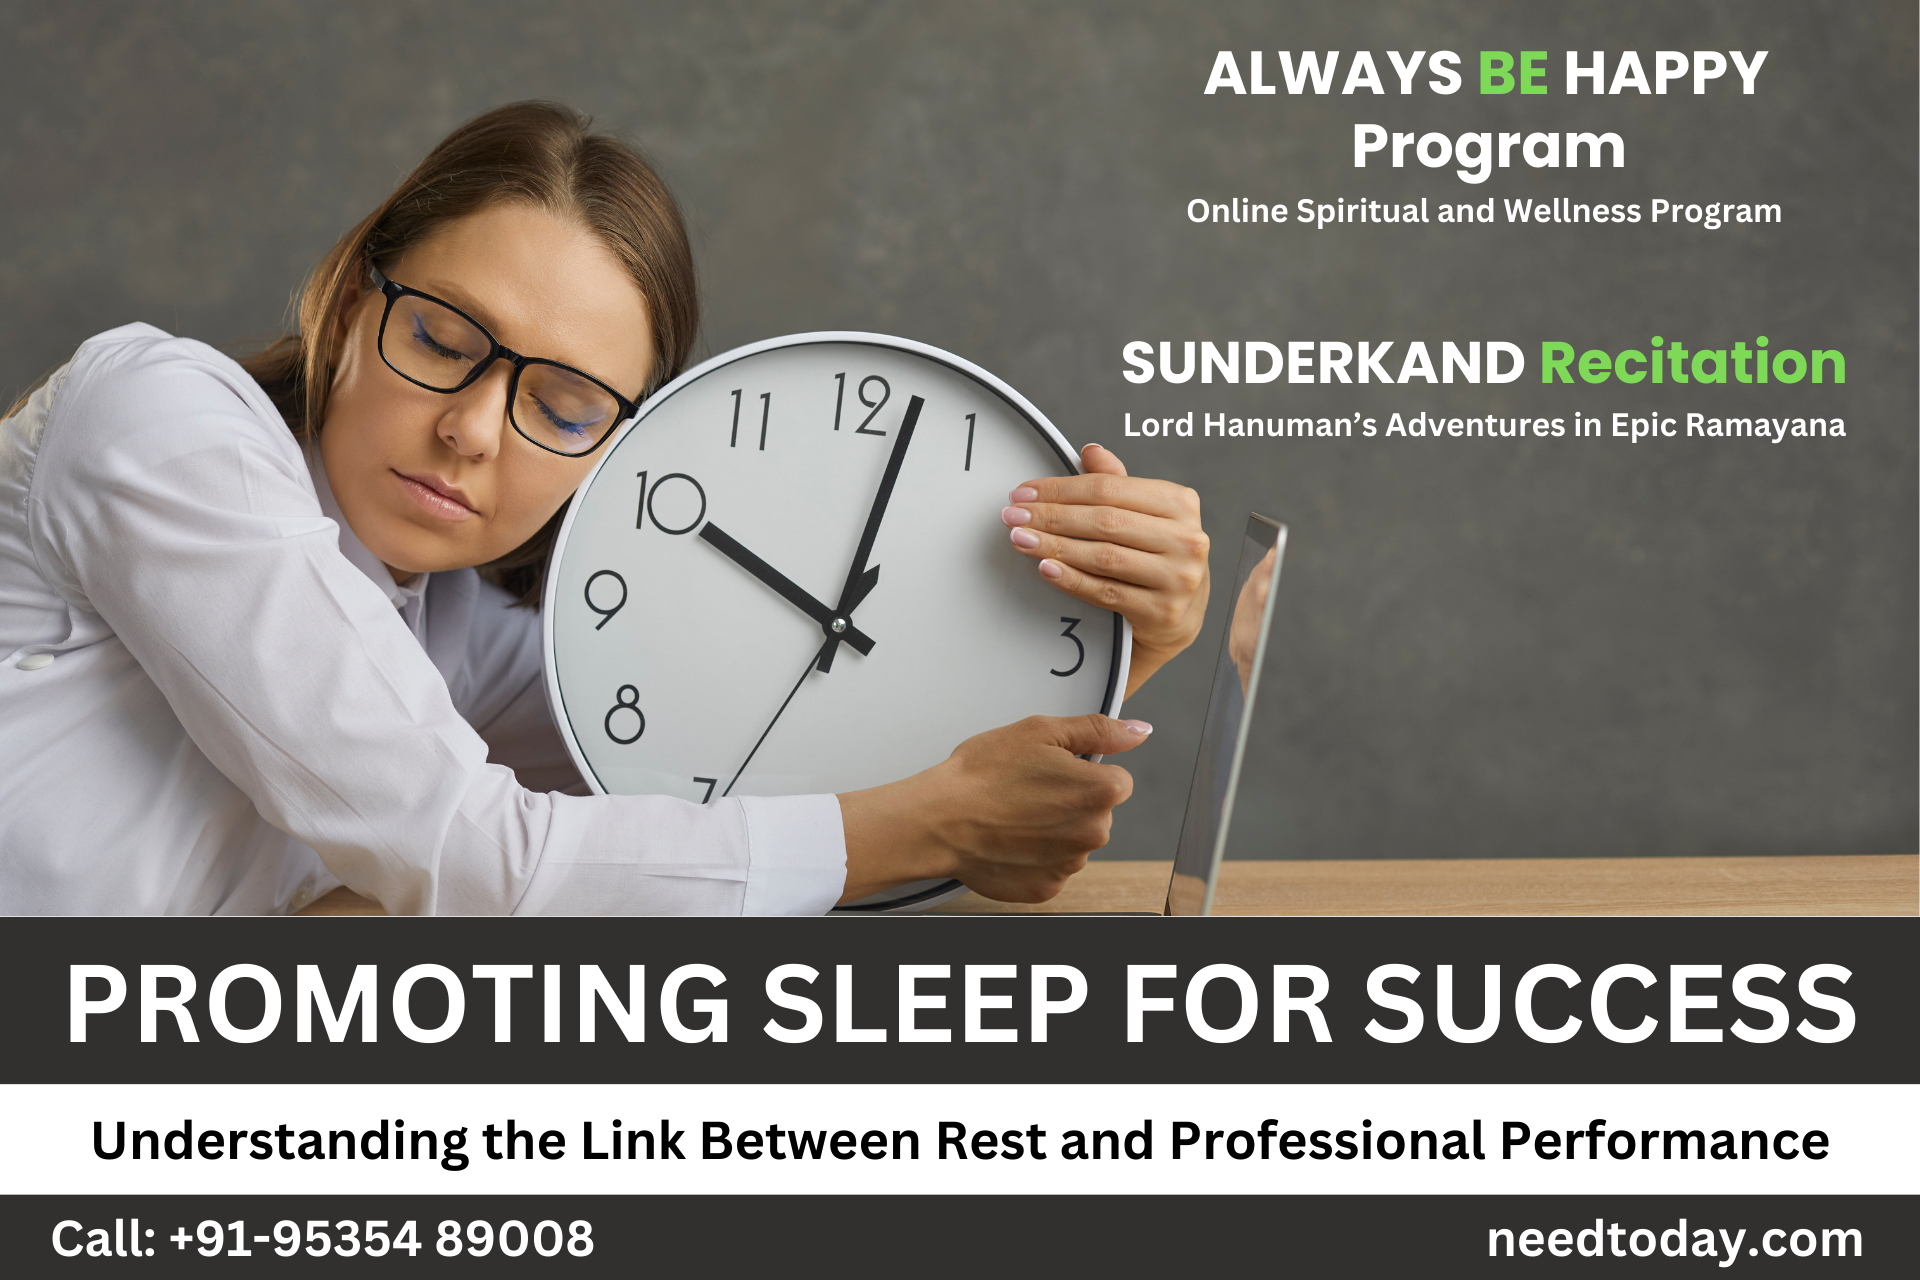 Promoting Sleep for Success: Understanding the Link Between Rest and Professional Performance